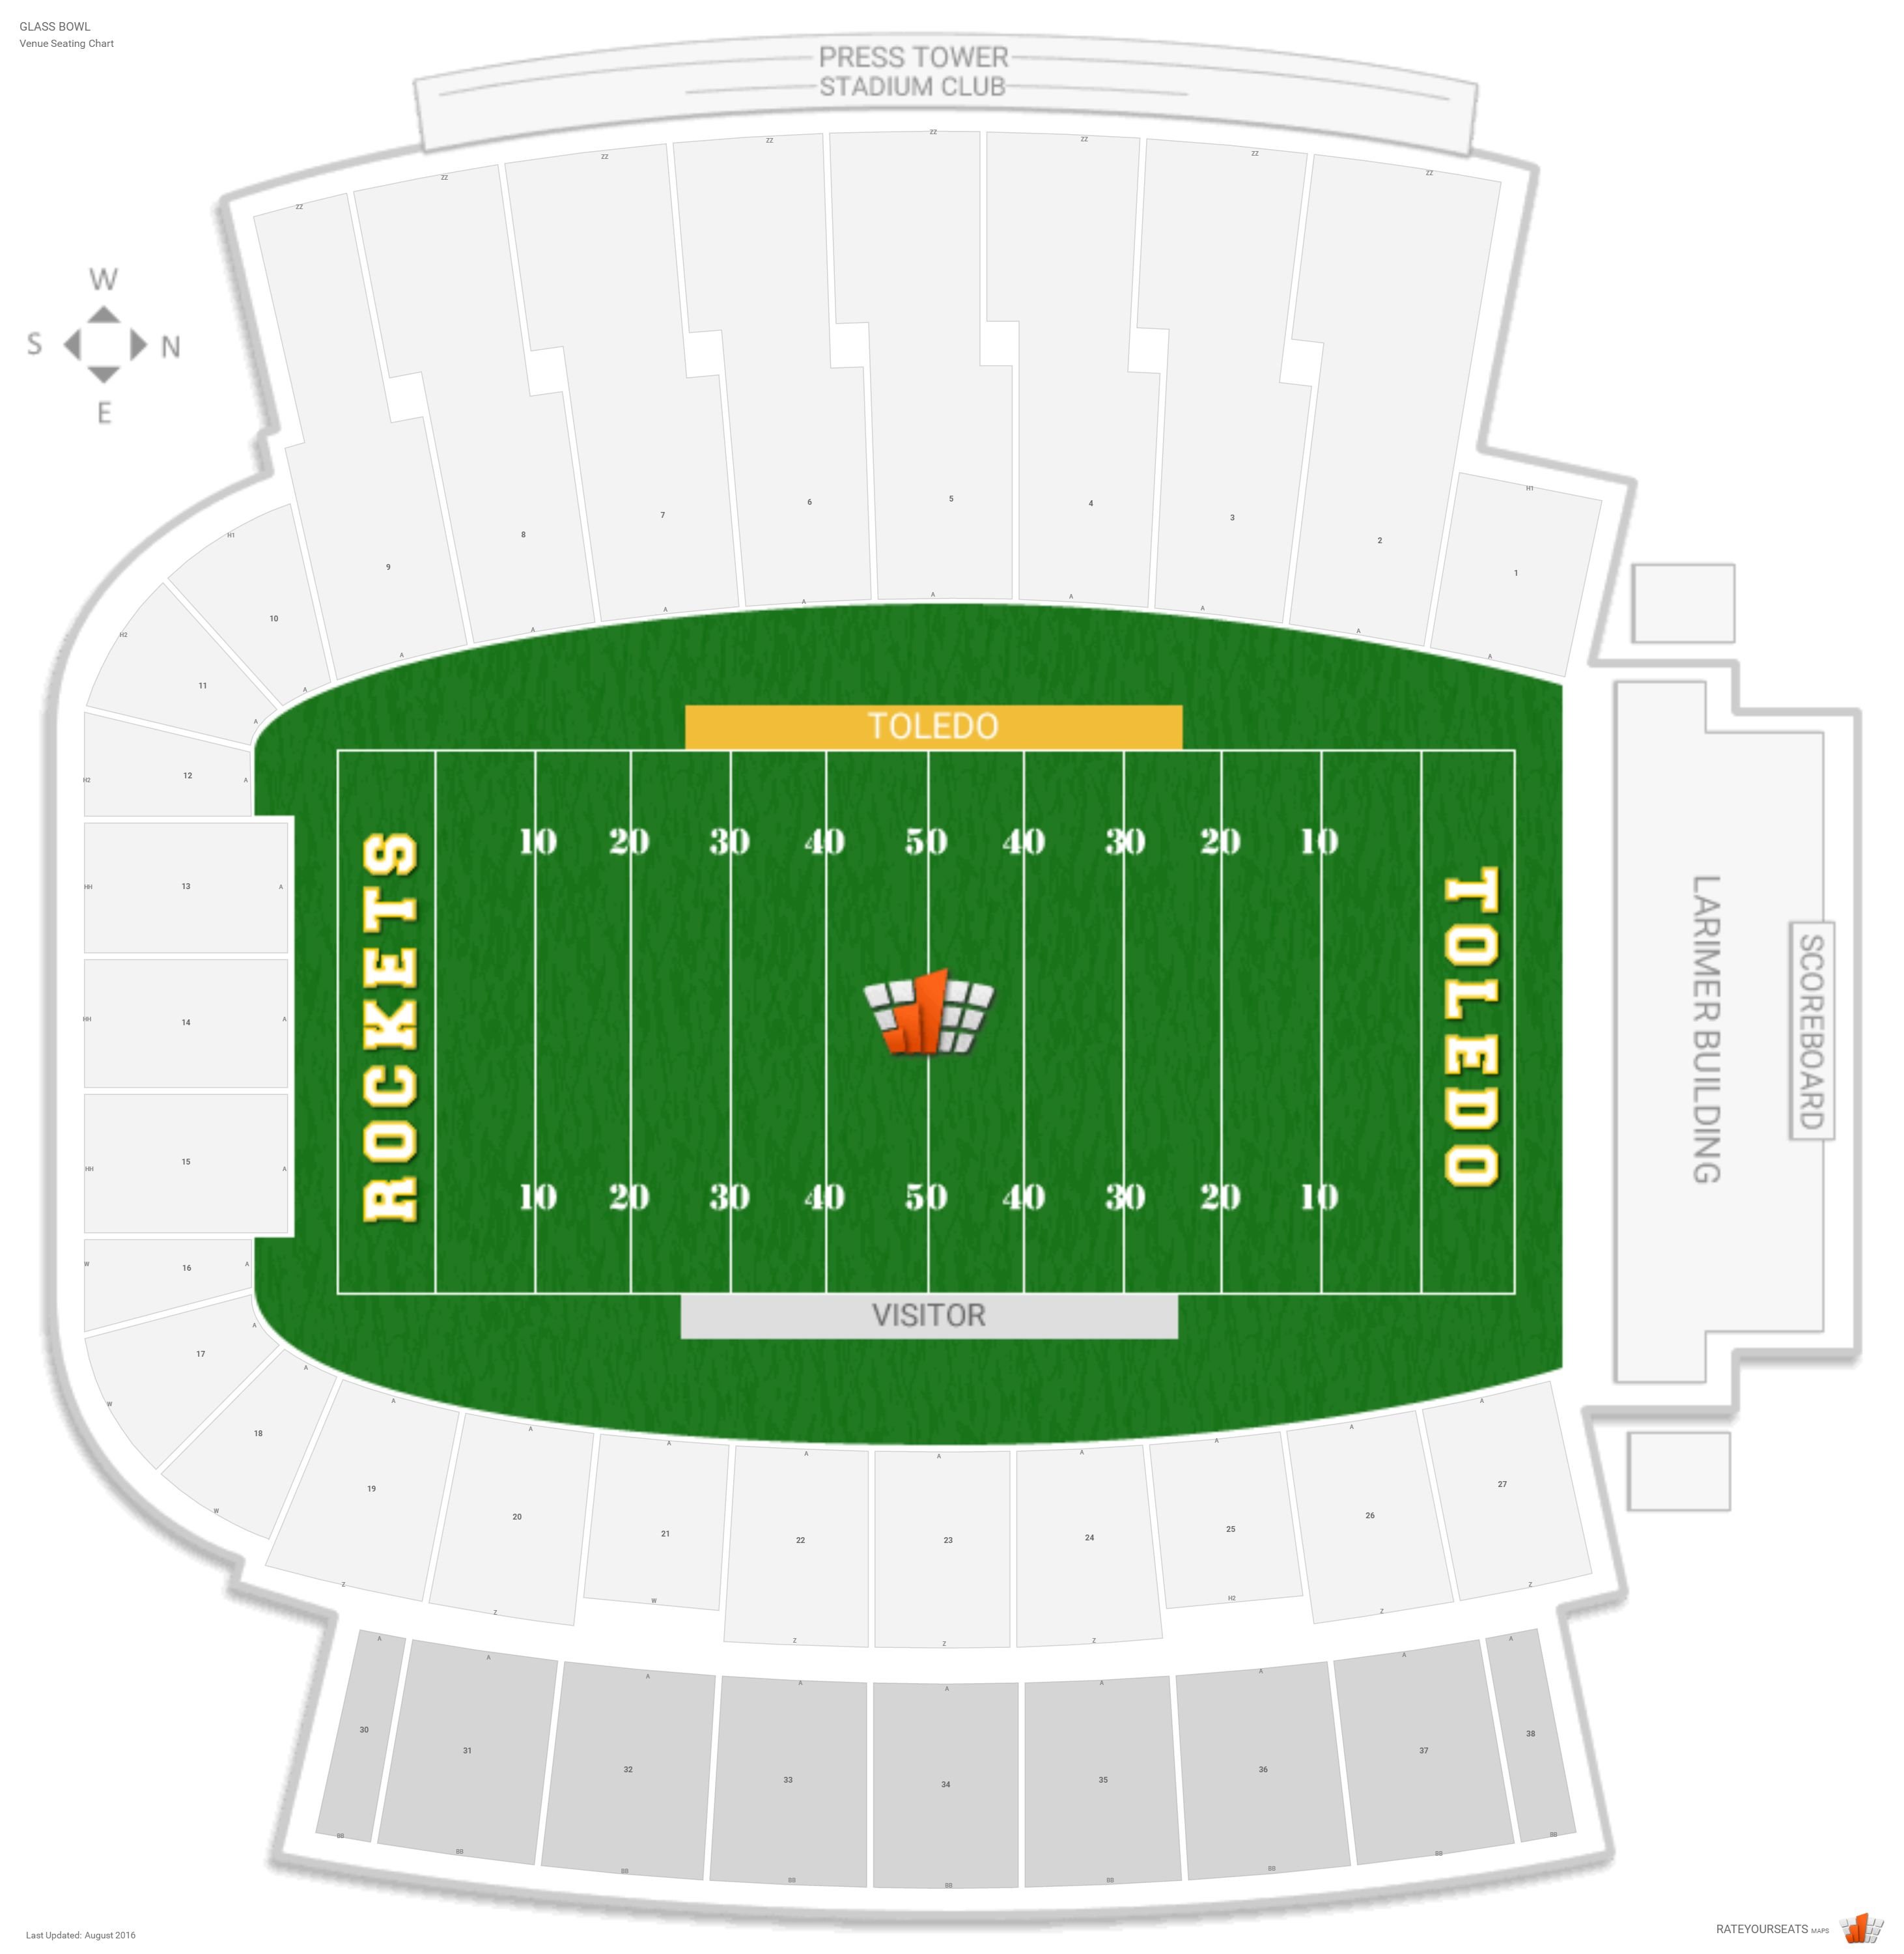 Glass Bowl (Toledo) Seating Guide - RateYourSeats.com